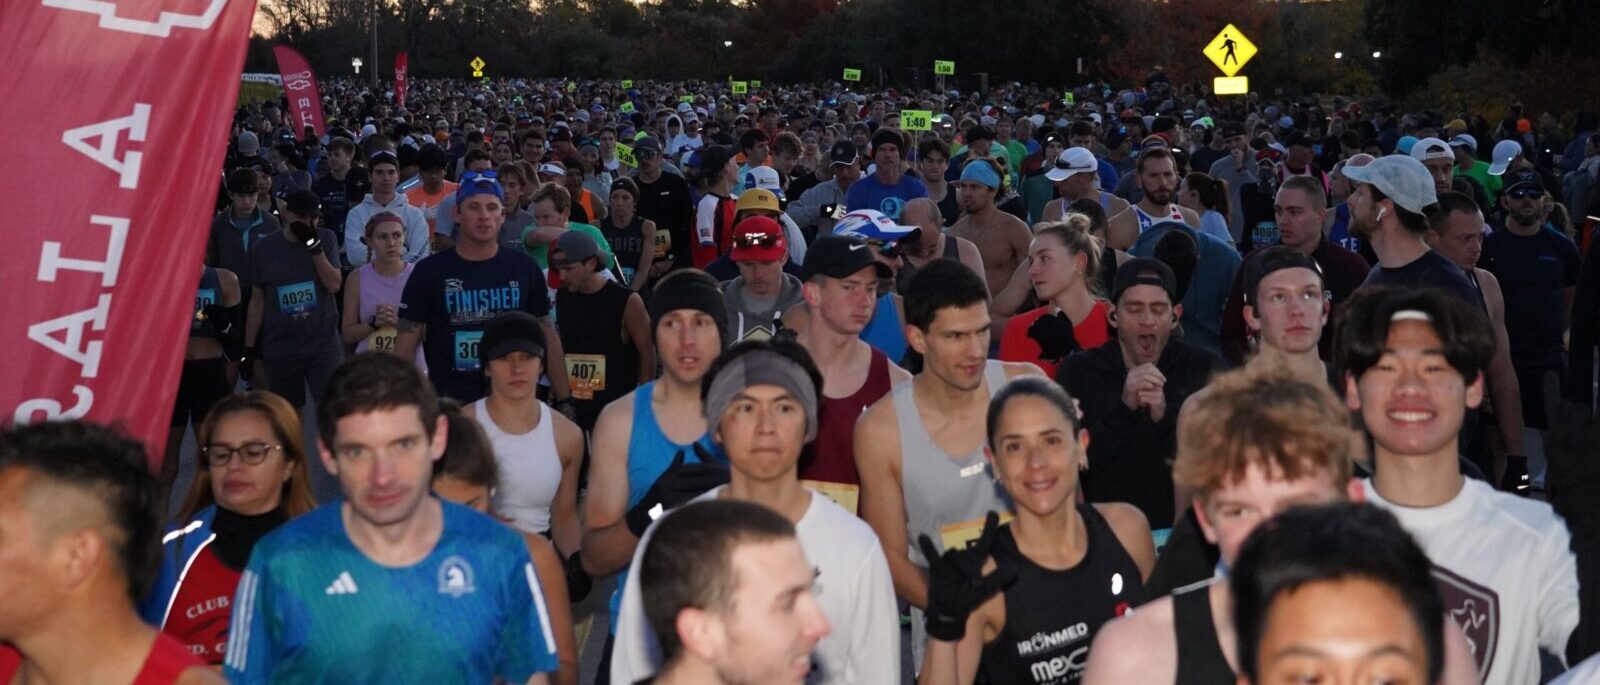 crowd of runners at the starting line